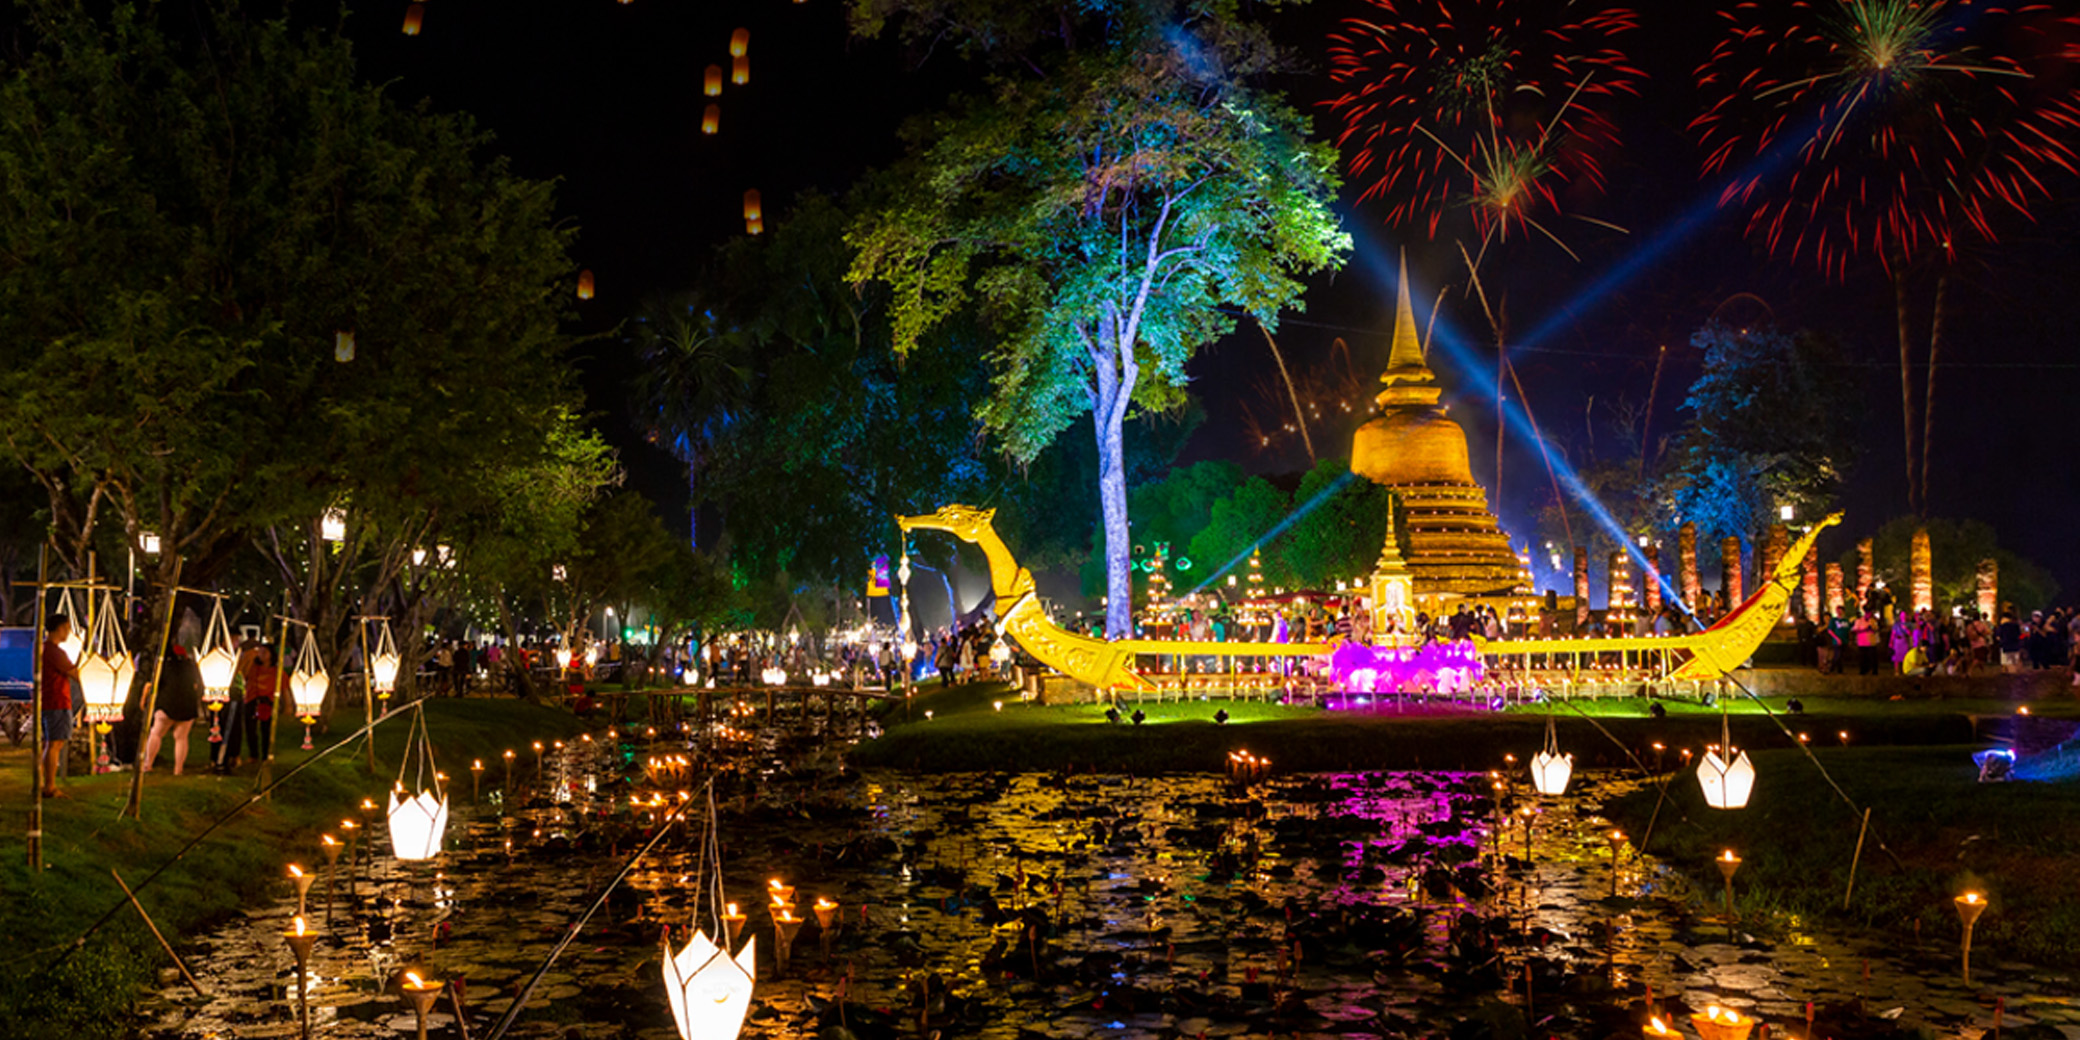 Reviving the tradition of Loy Krathong, Sukhothai